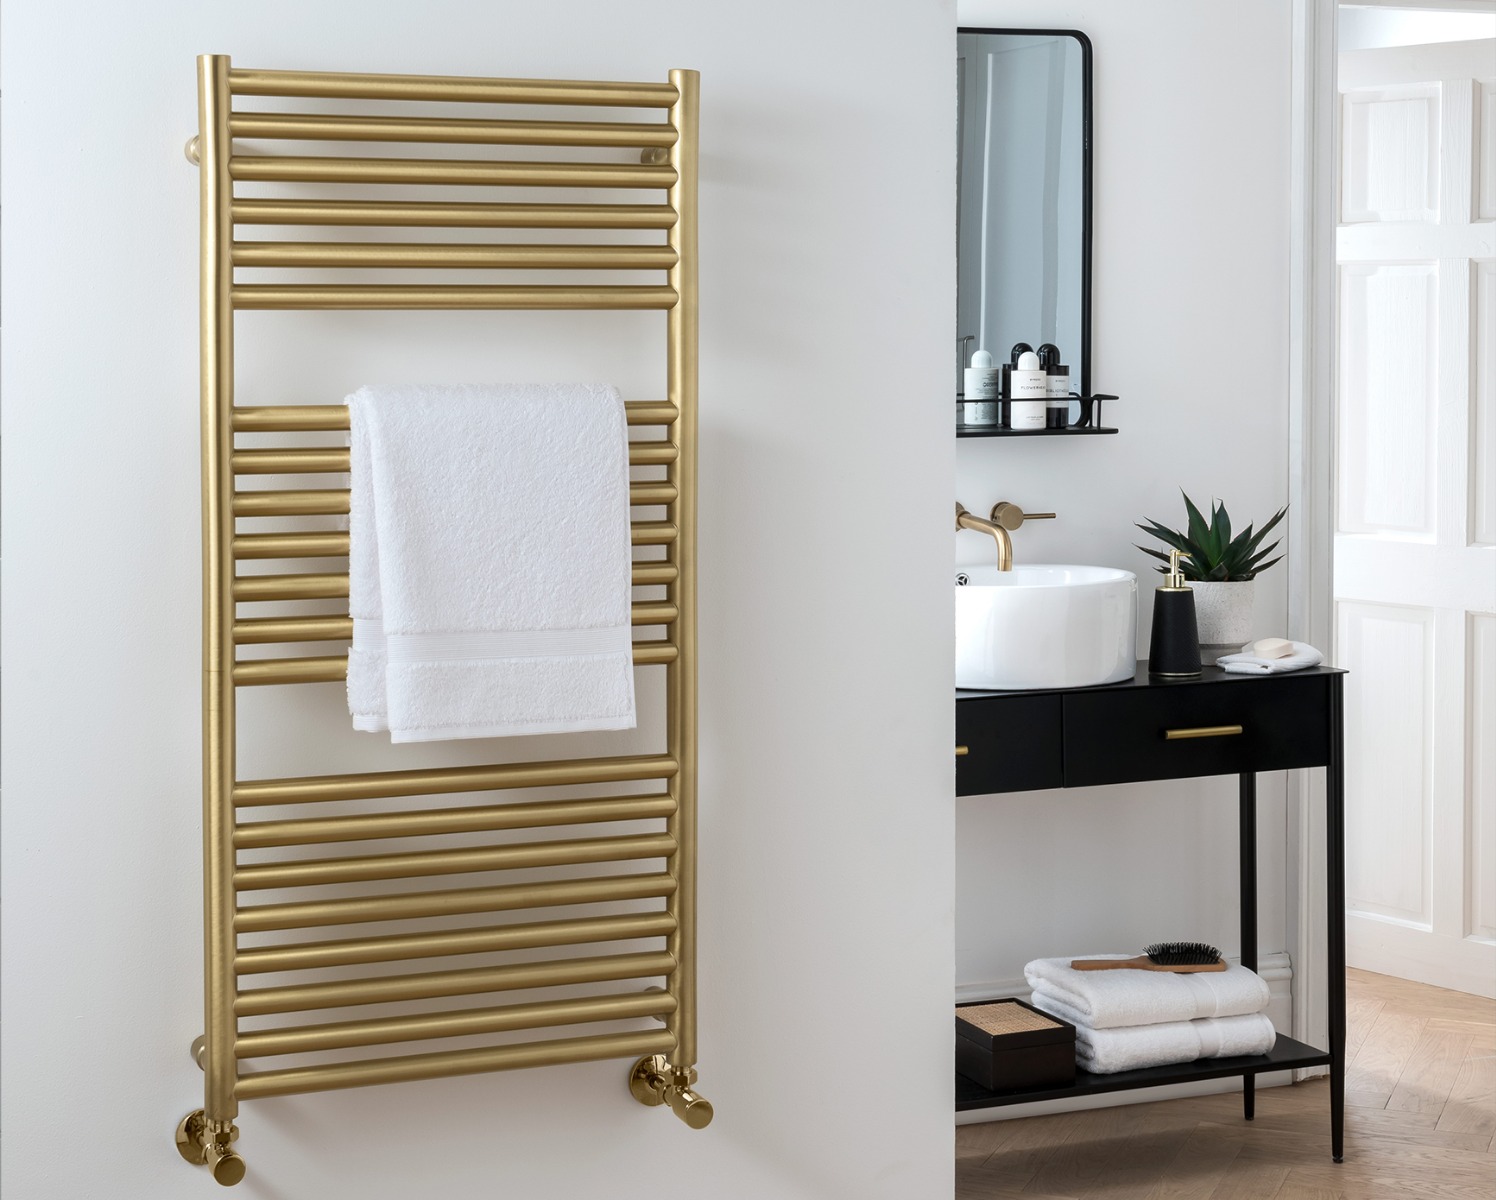 Ladder Rails Studio Electric Only Non-lacquered - Brushed Brass 720x500